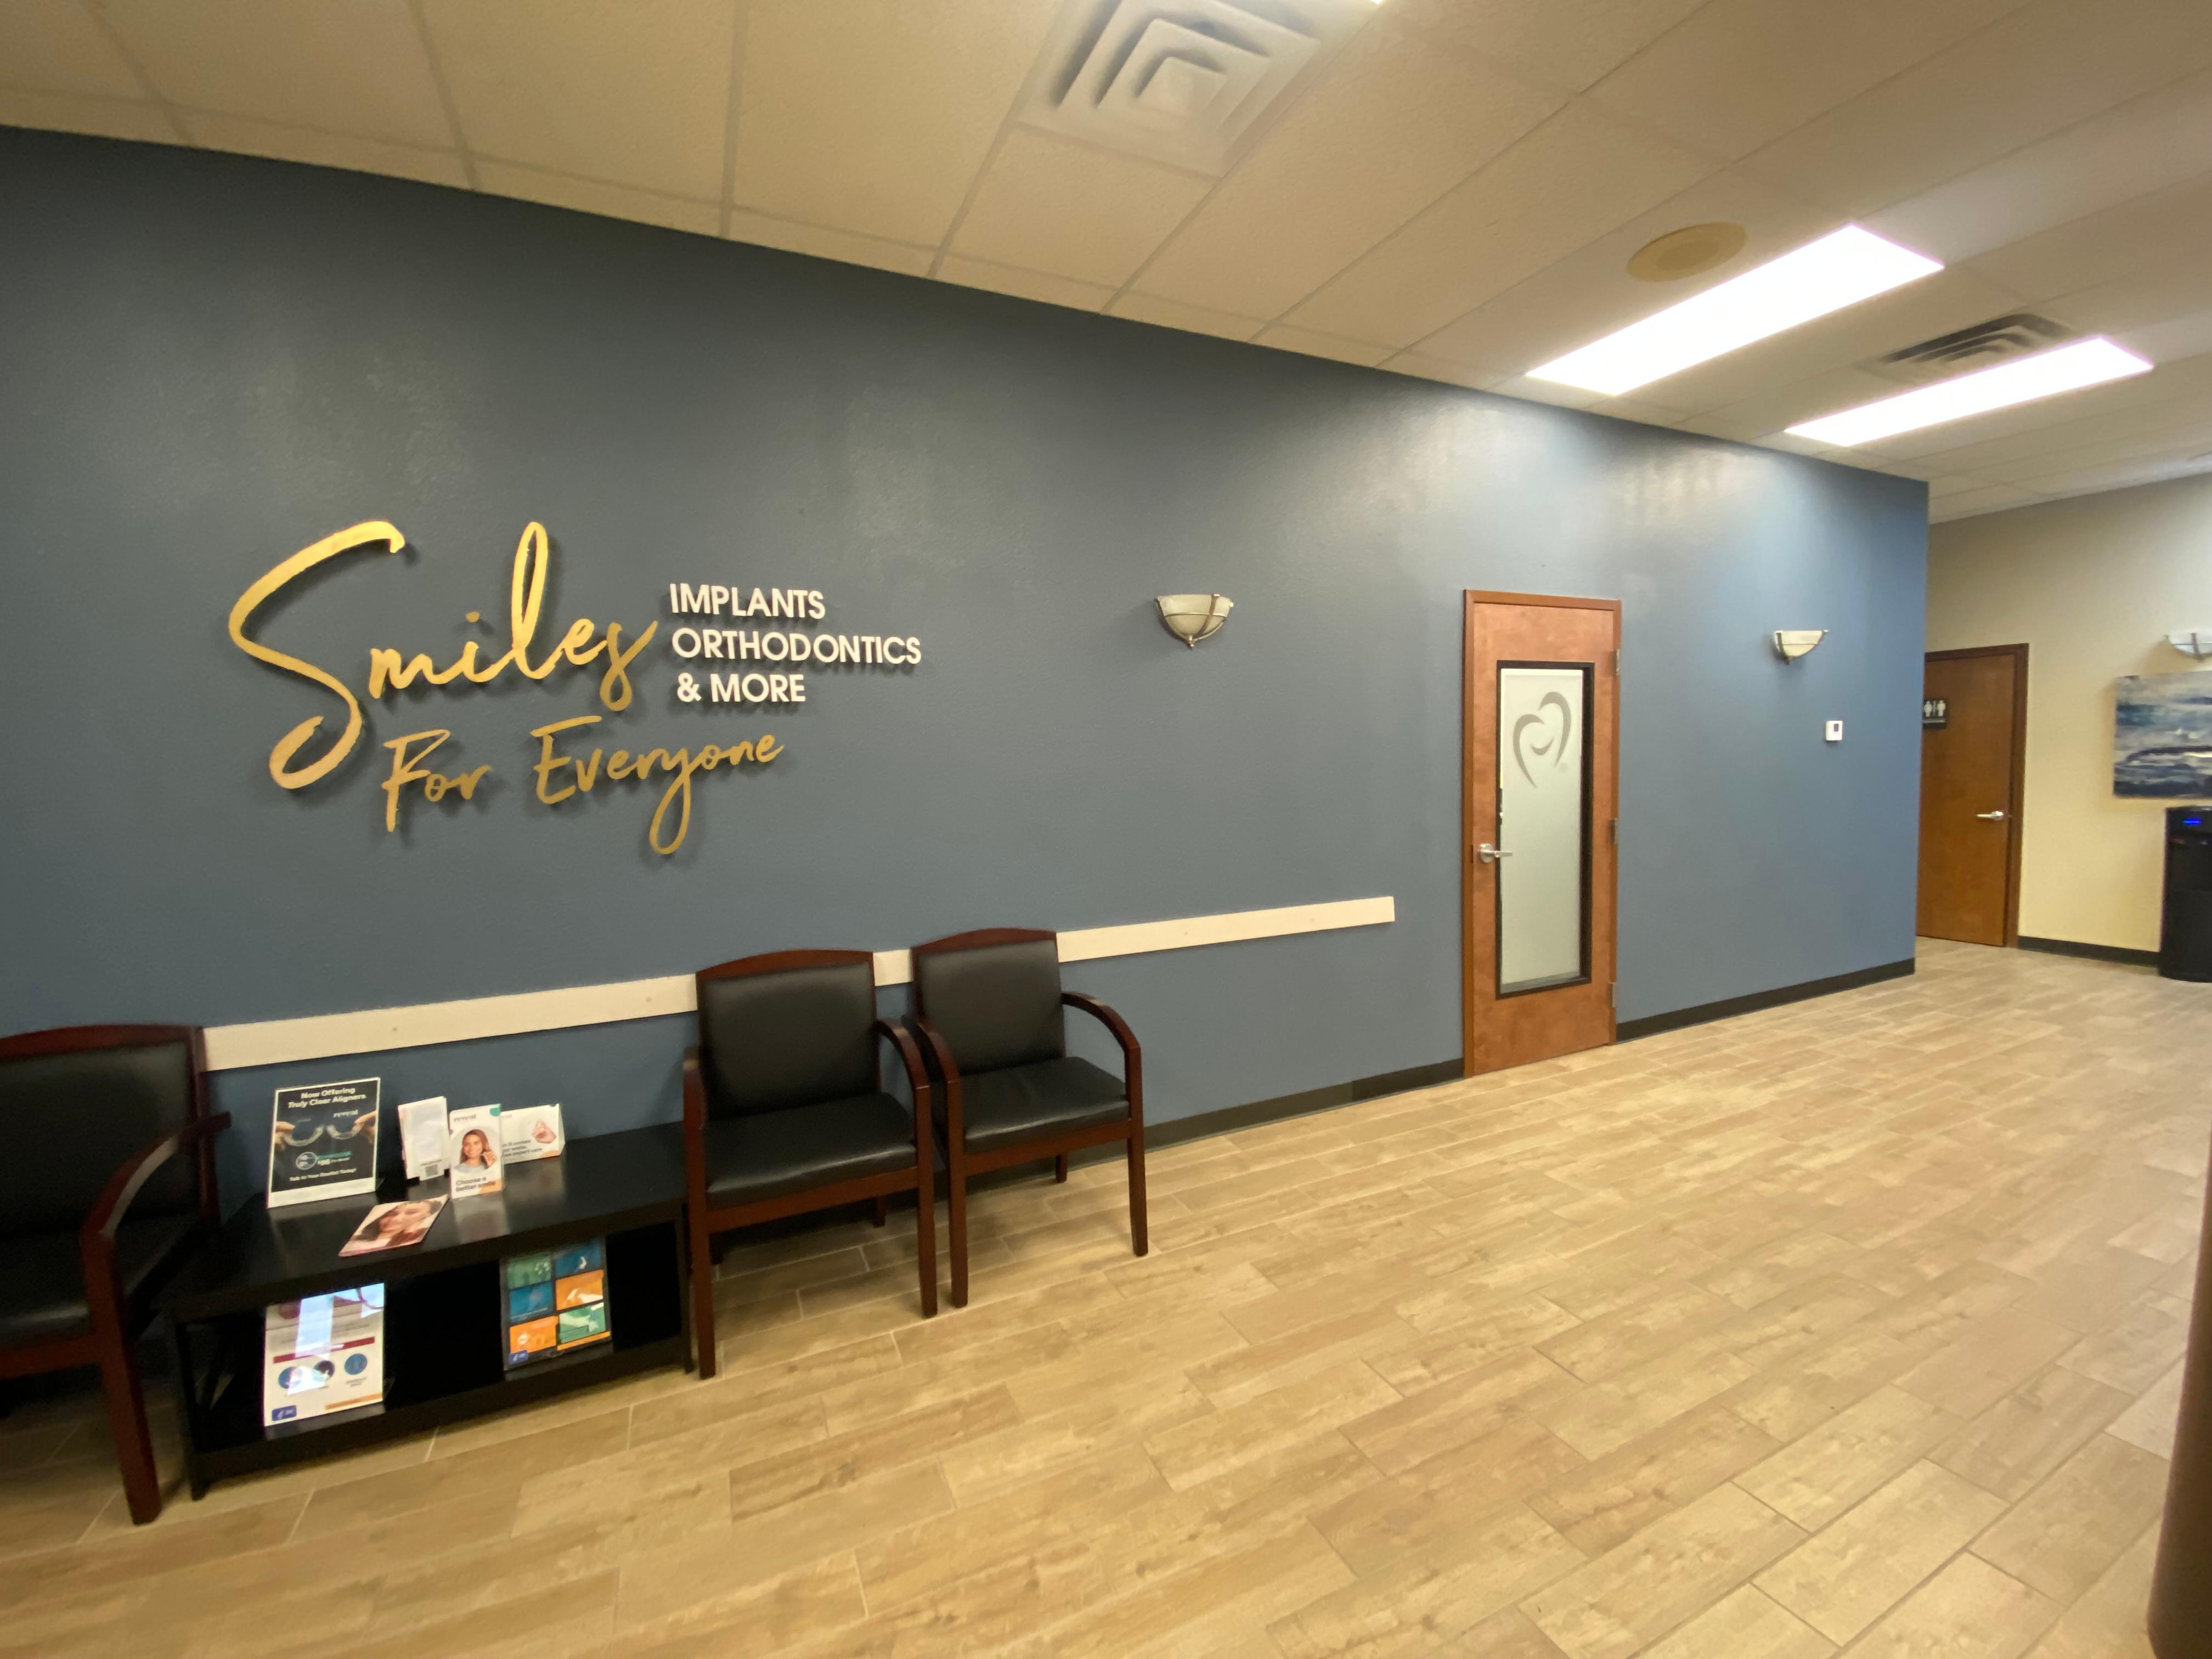 Welcome to Castle Dental & Implants - your one-stop shop for all your dental needs! Visit our office in Pasadena, Texas for routine exams and cleanings, extractions, fillings, dental implants, and more! We recently updated our office and it now features a Dental Implant Suite! Ask us about single implants, implant-retained dentures, and implant restoration services!